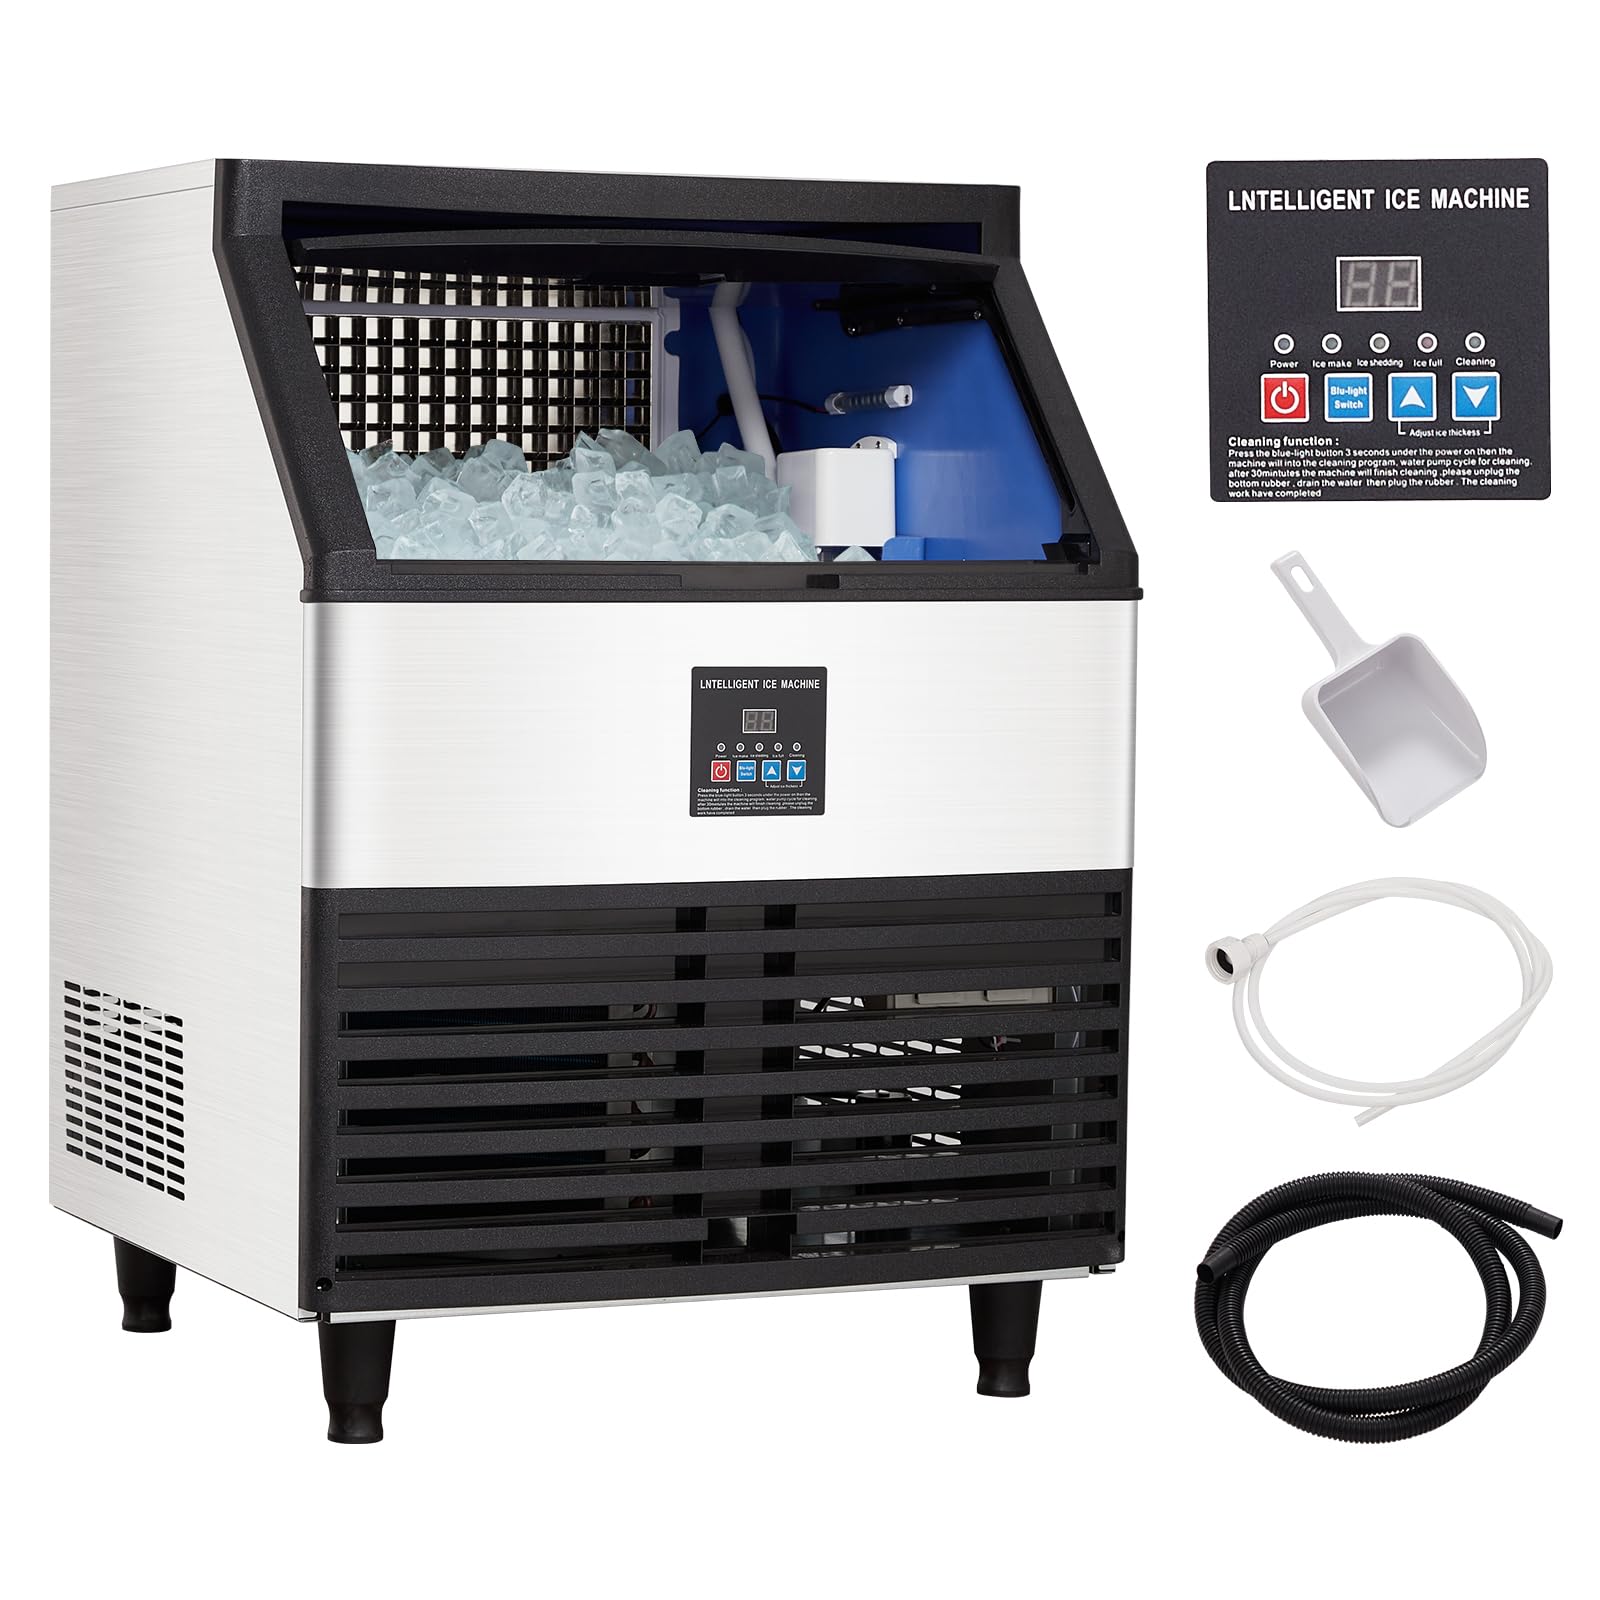 440lbs/24H Stainless Steel Ice Machine, Commercial Under Counter, LCD